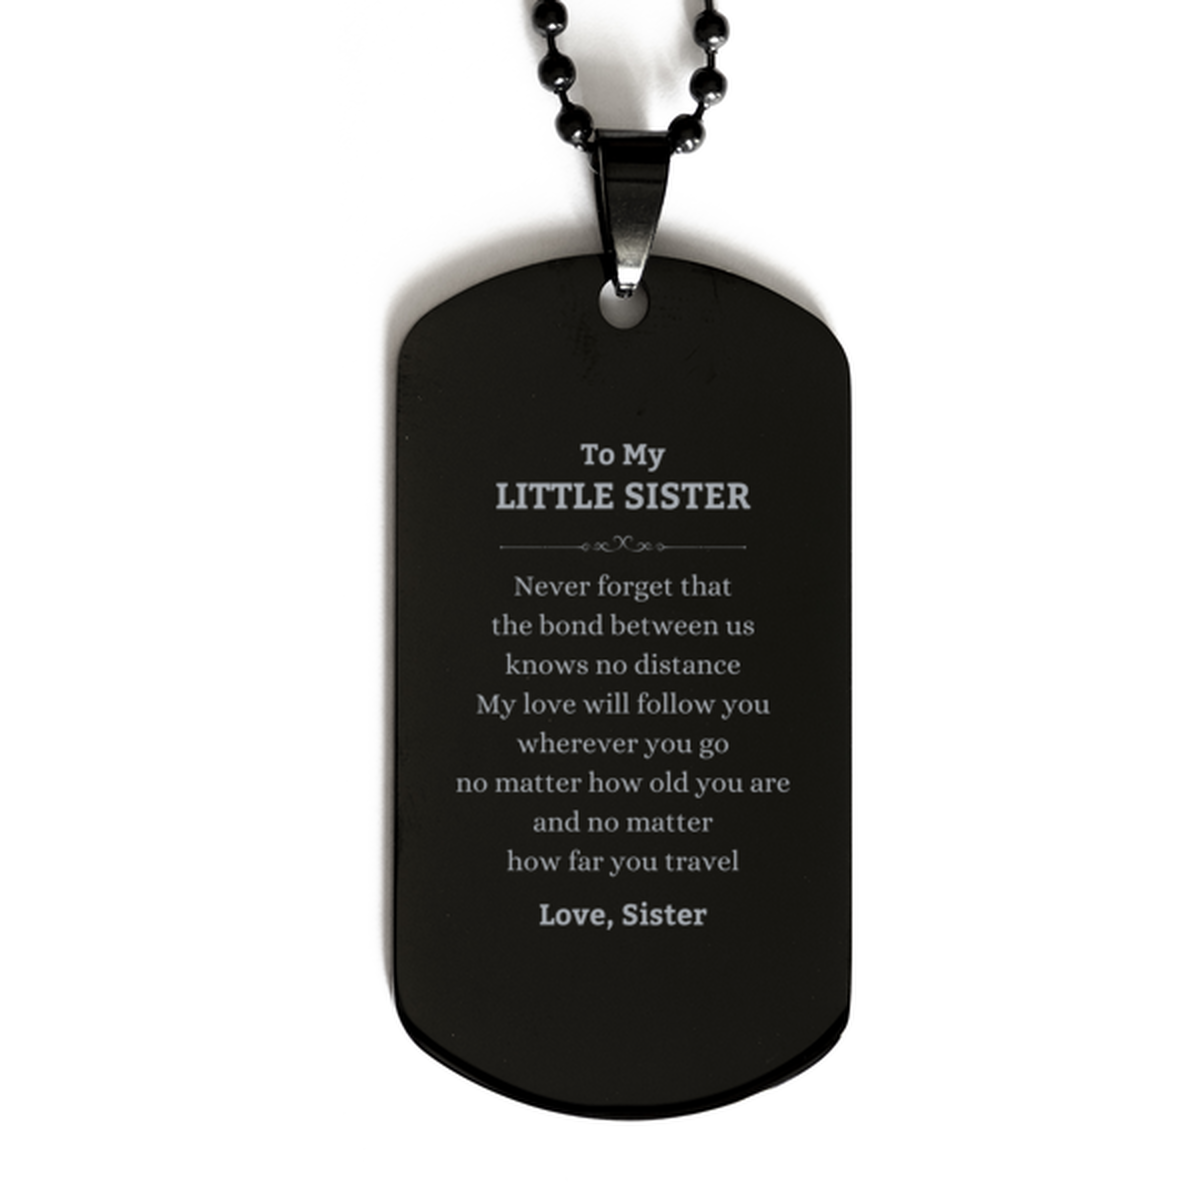 Little Sister Birthday Gifts from Sister, Adjustable Black Dog Tag for Little Sister Christmas Graduation Unique Gifts Little Sister Never forget that the bond between us knows no distance. Love, Sister